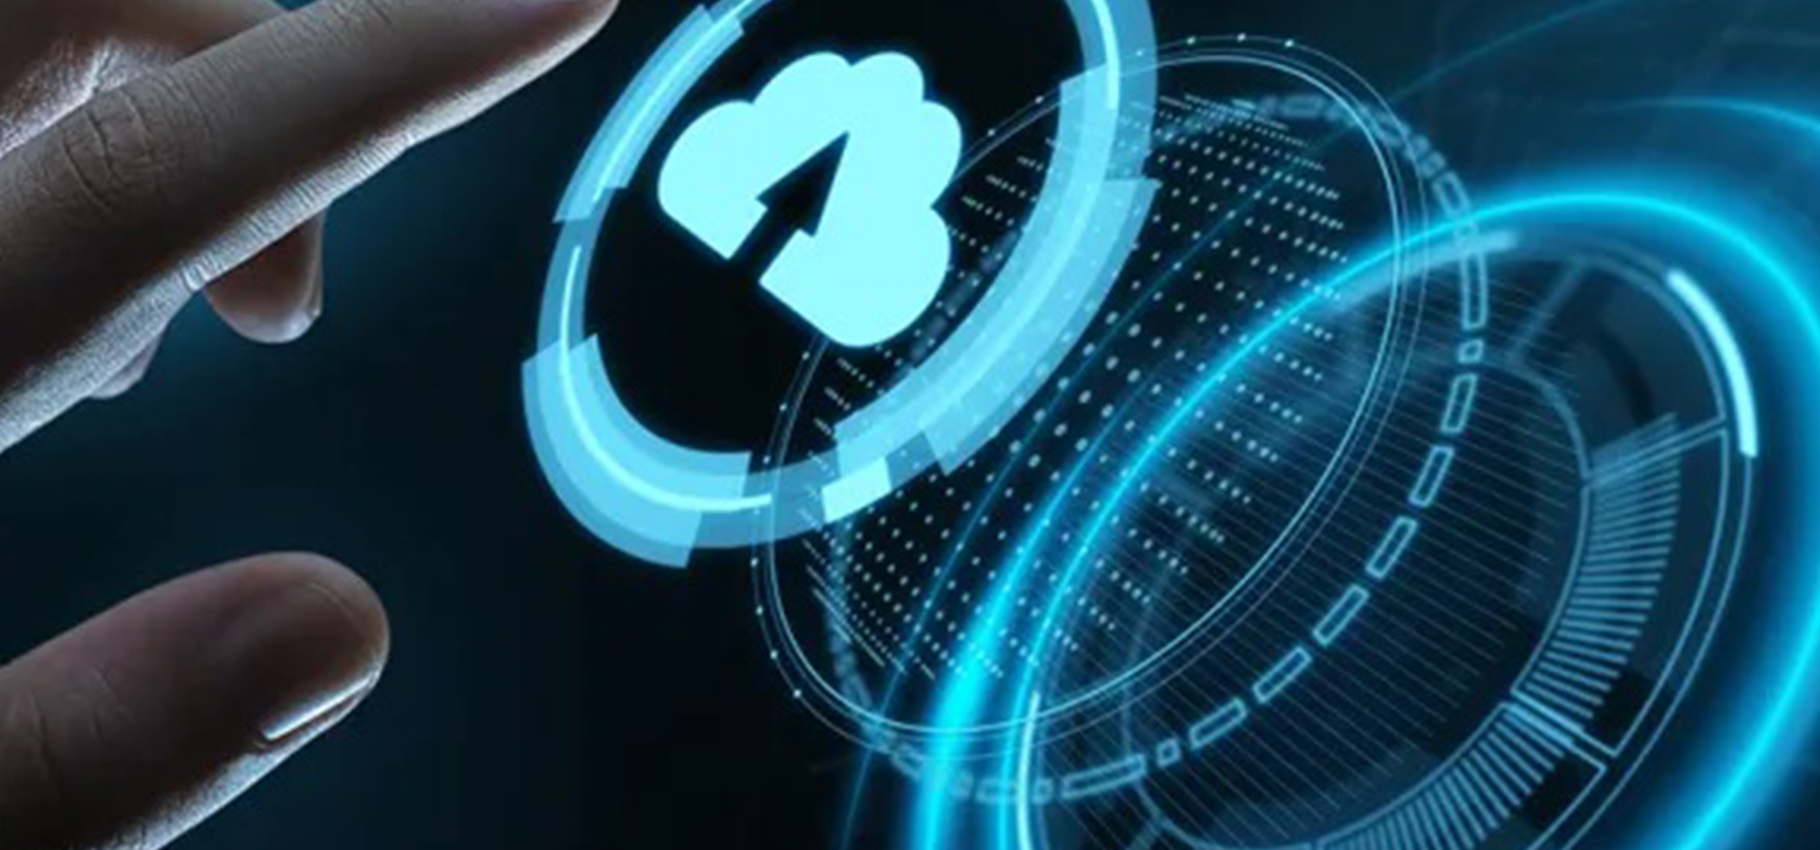 CISCO launches AppDynamics cloud to enable delivery of exceptional digital experiences